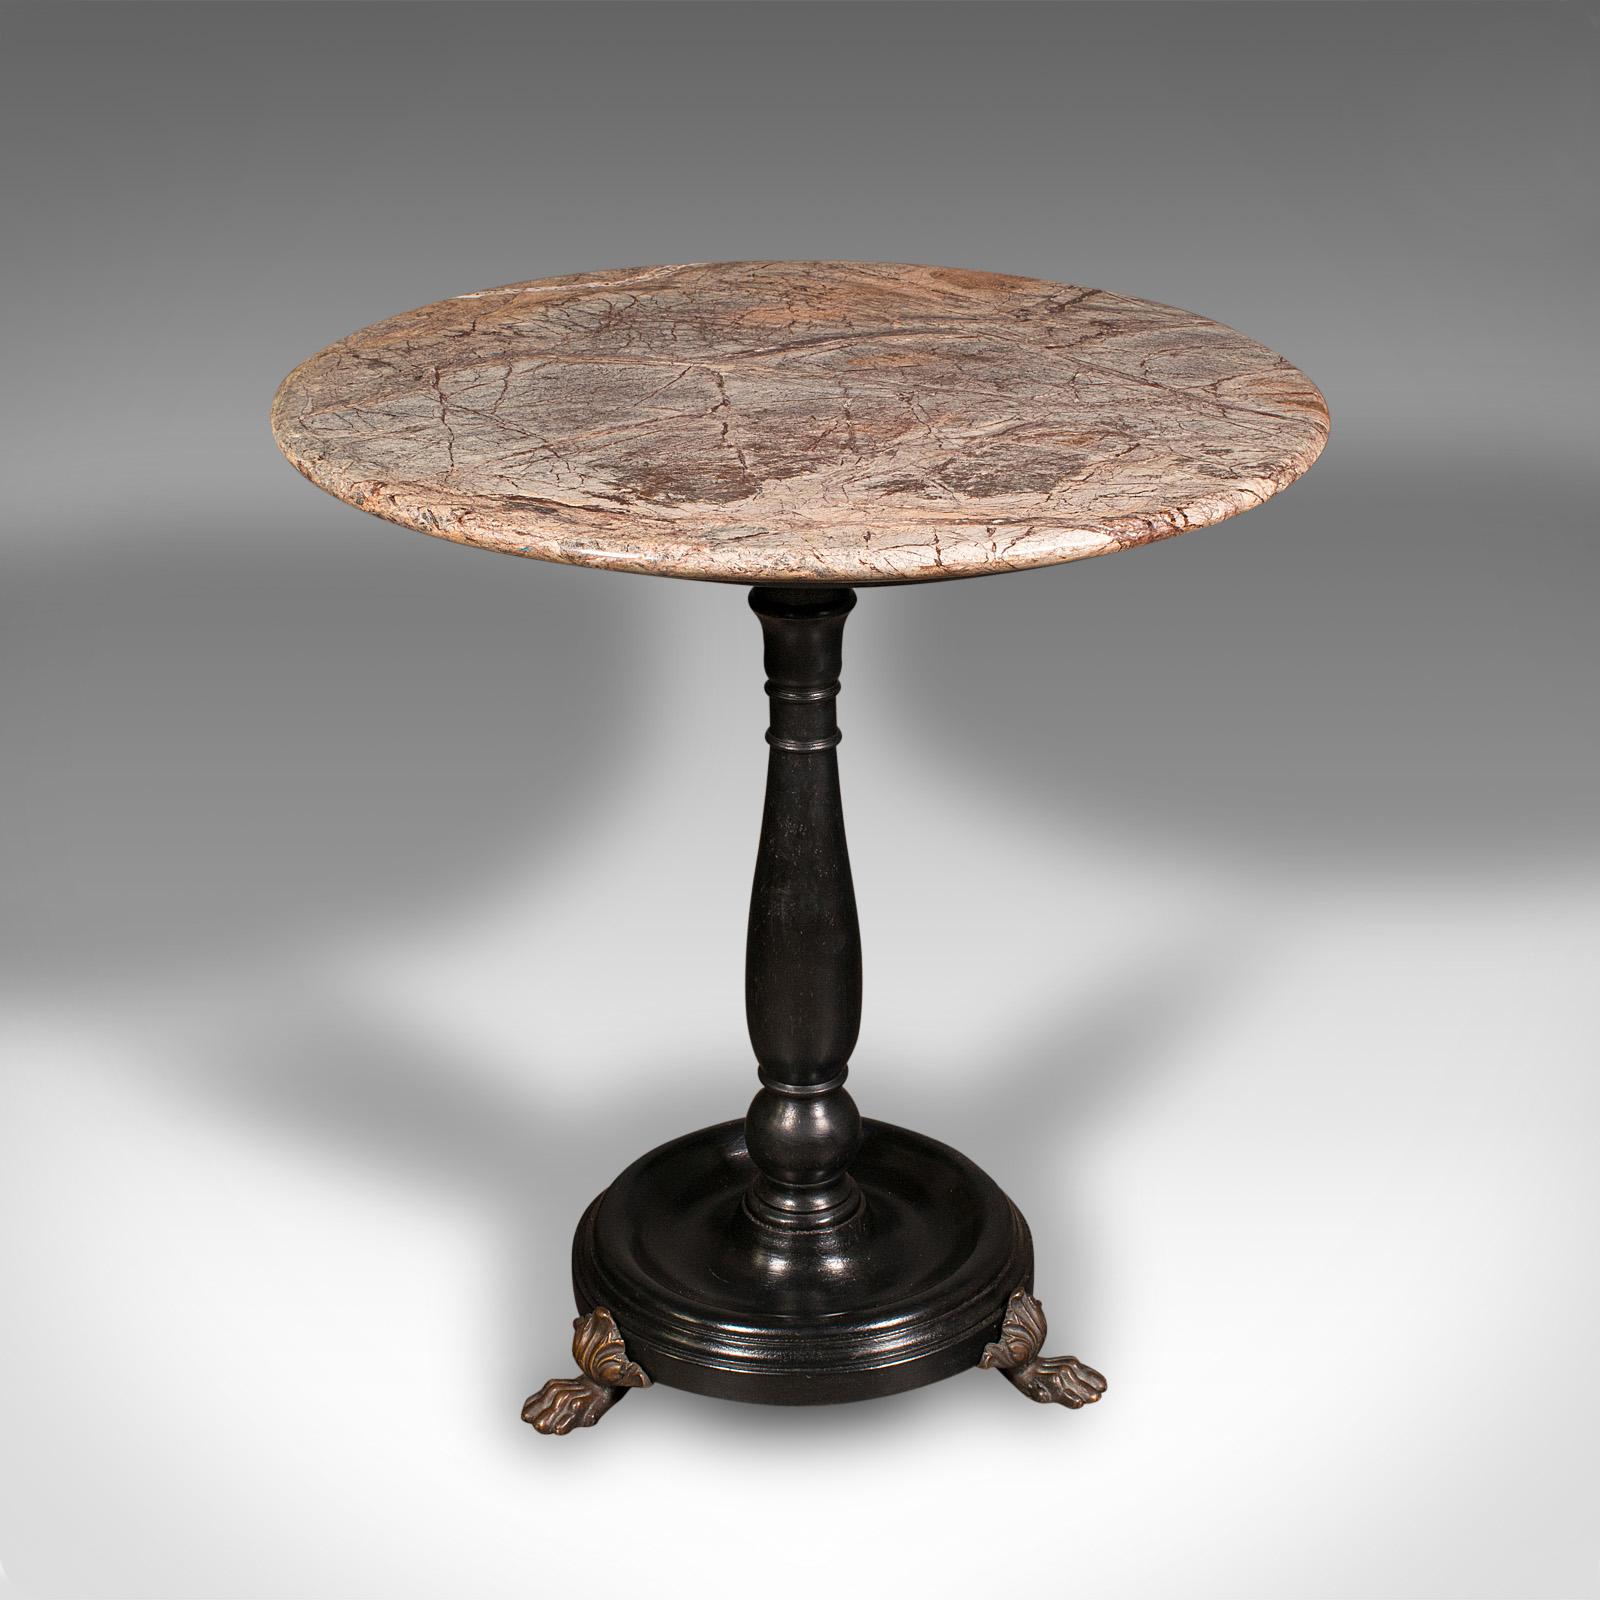 This is an antique country house lamp table. An English, marble topped wine or side table in Georgian revival taste, dating to the late Victorian period, circa 1890.

Accentuate your room with this fine Georgian revival table
Displays a desirable